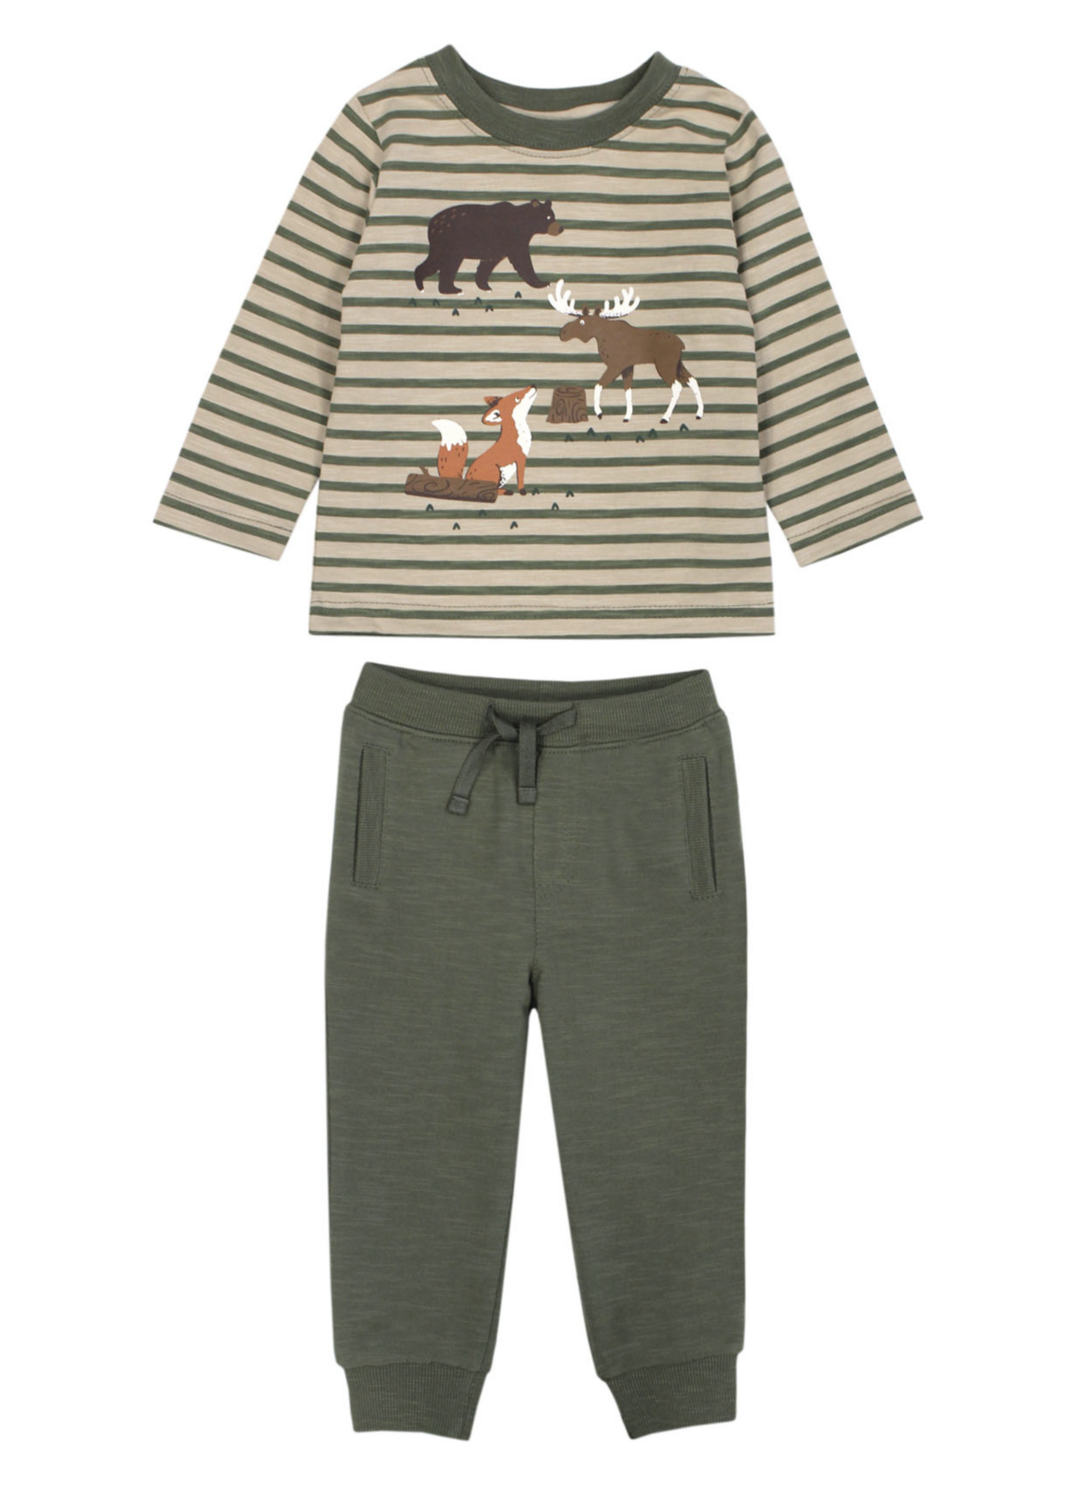 Multi animal stripe top with olive terry pant set